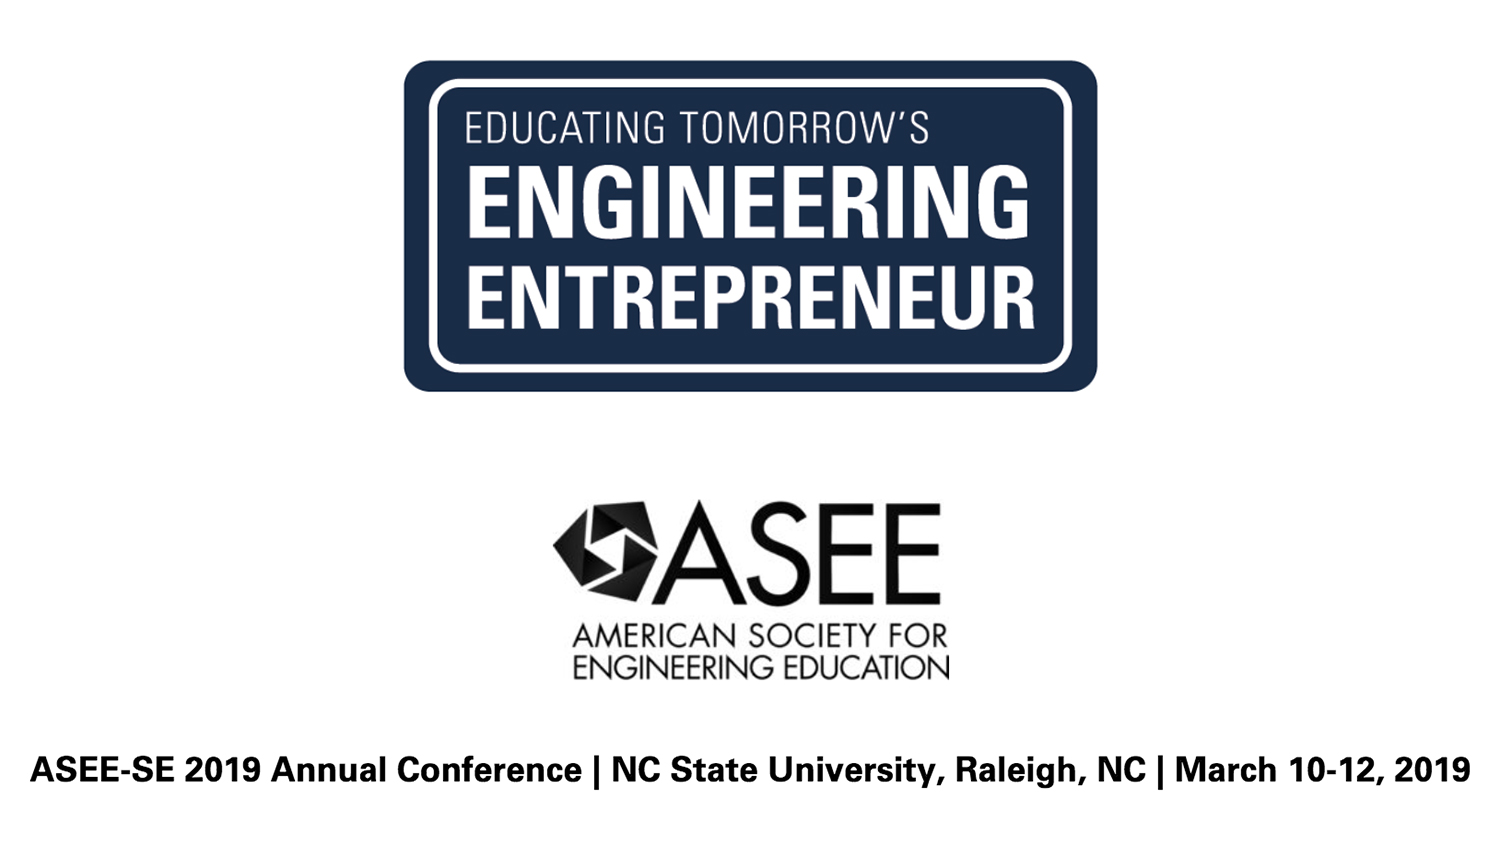 ASEE-SE 2019 Annual Conference | NC State University, Raleigh, NC | March 10-12, 2019